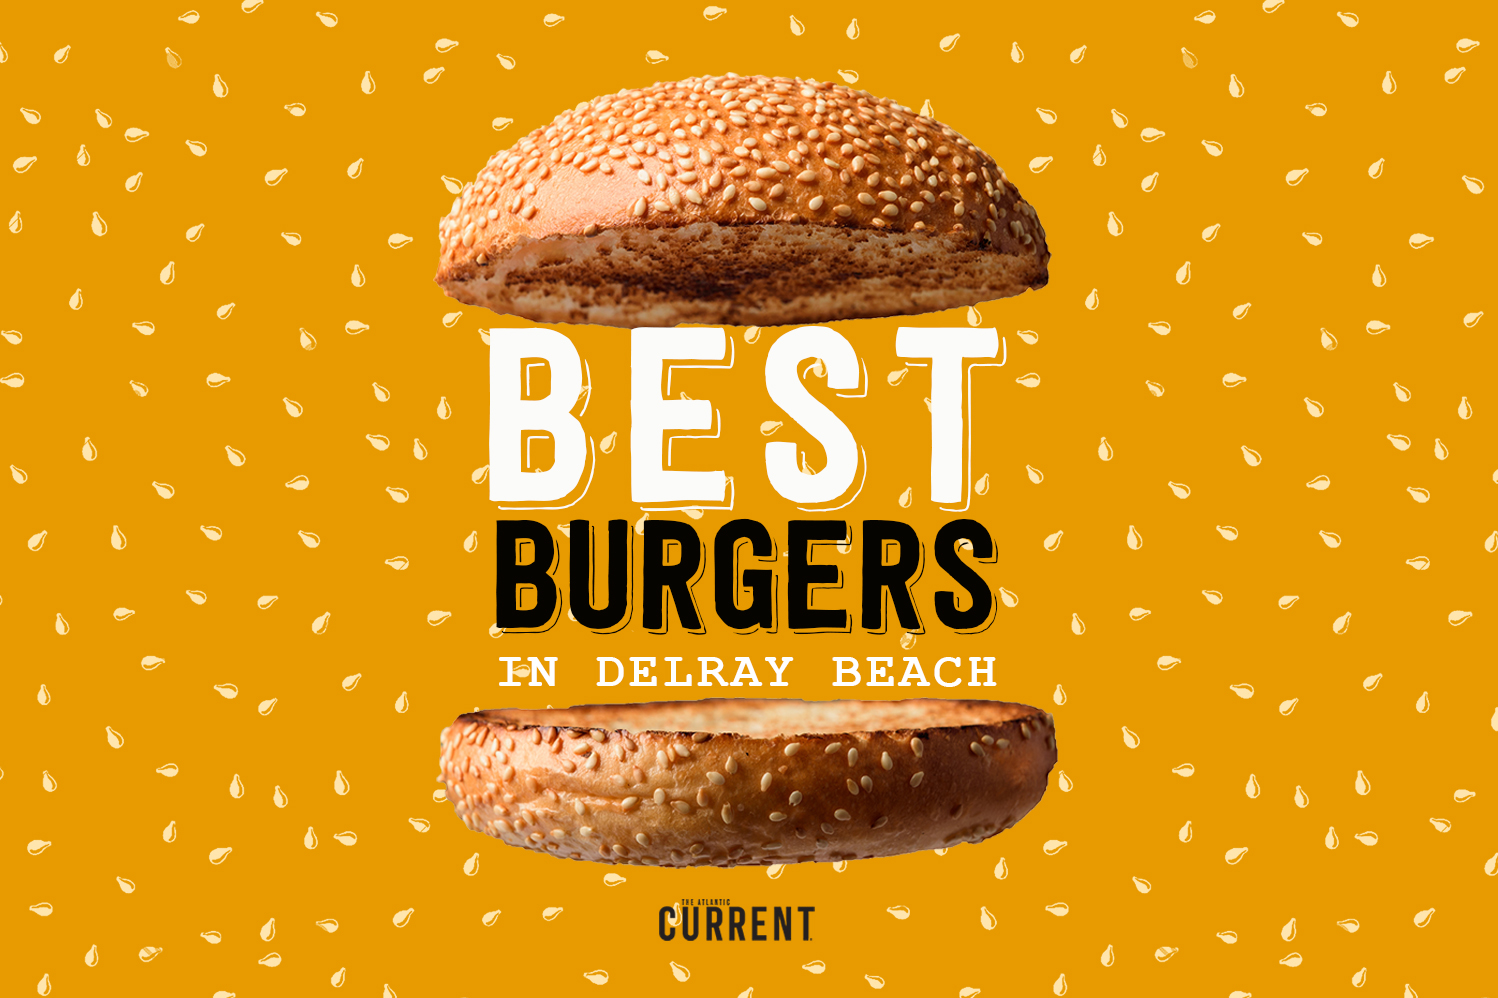 The 5 Best Burgers in Delray Beach